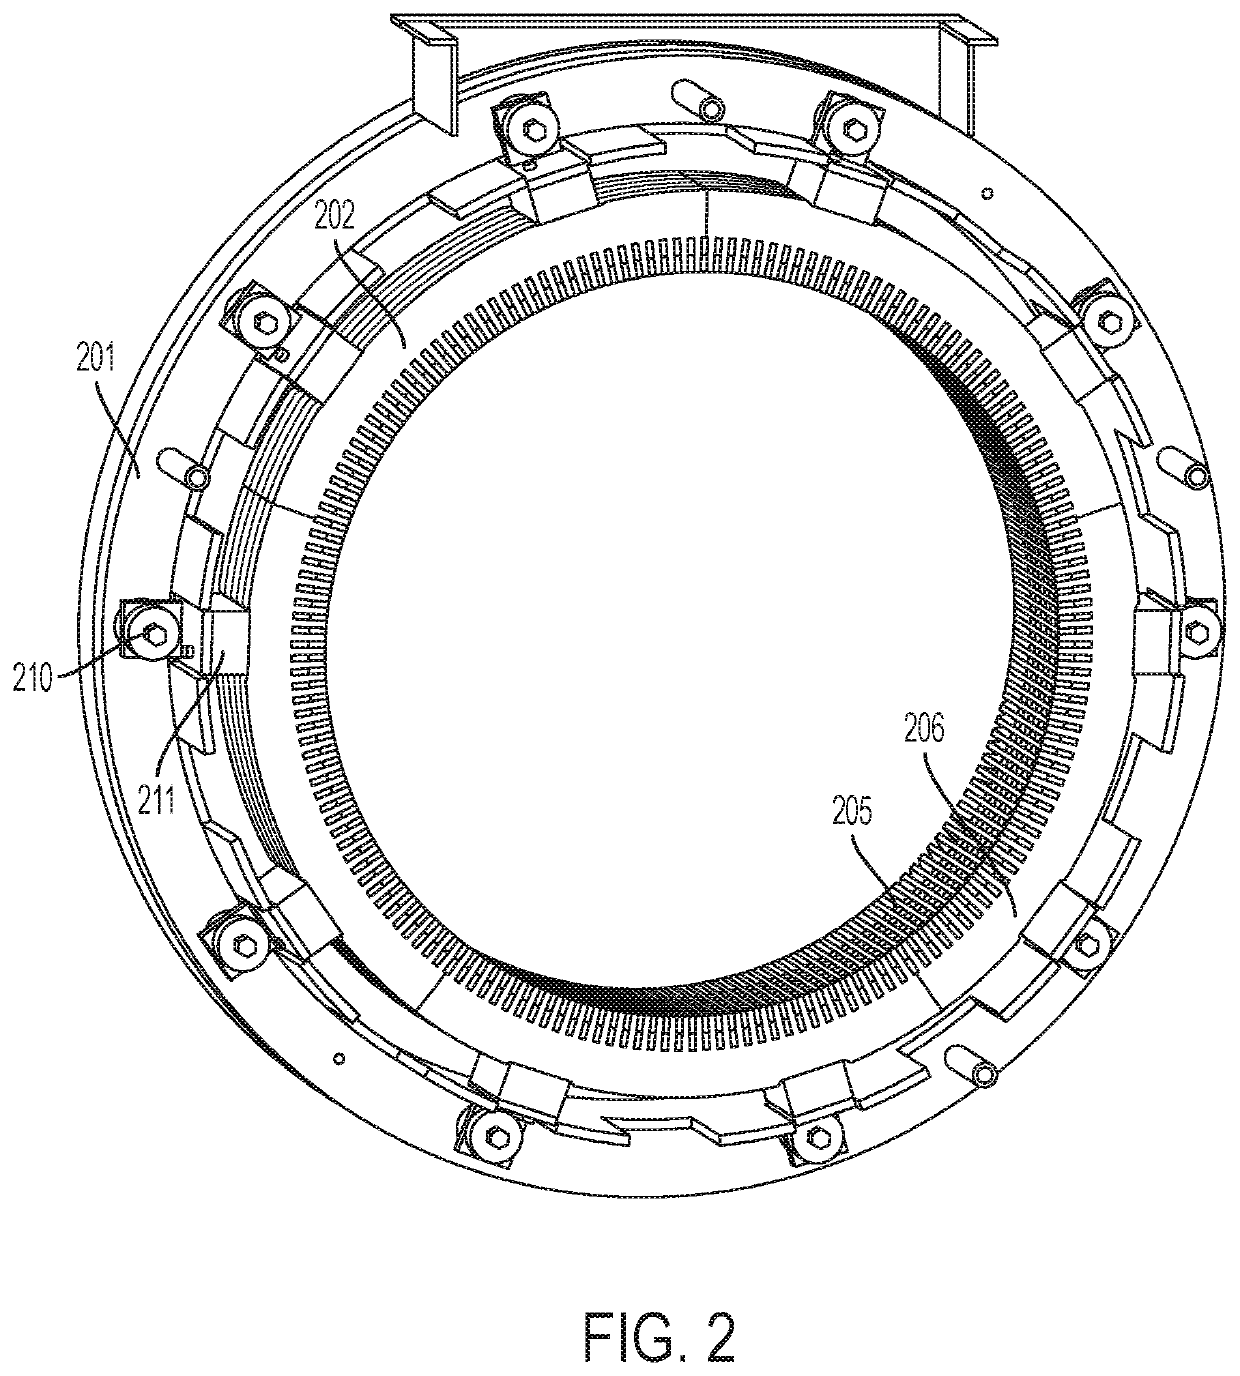 Electrical isolation mounting of electrical machine stator